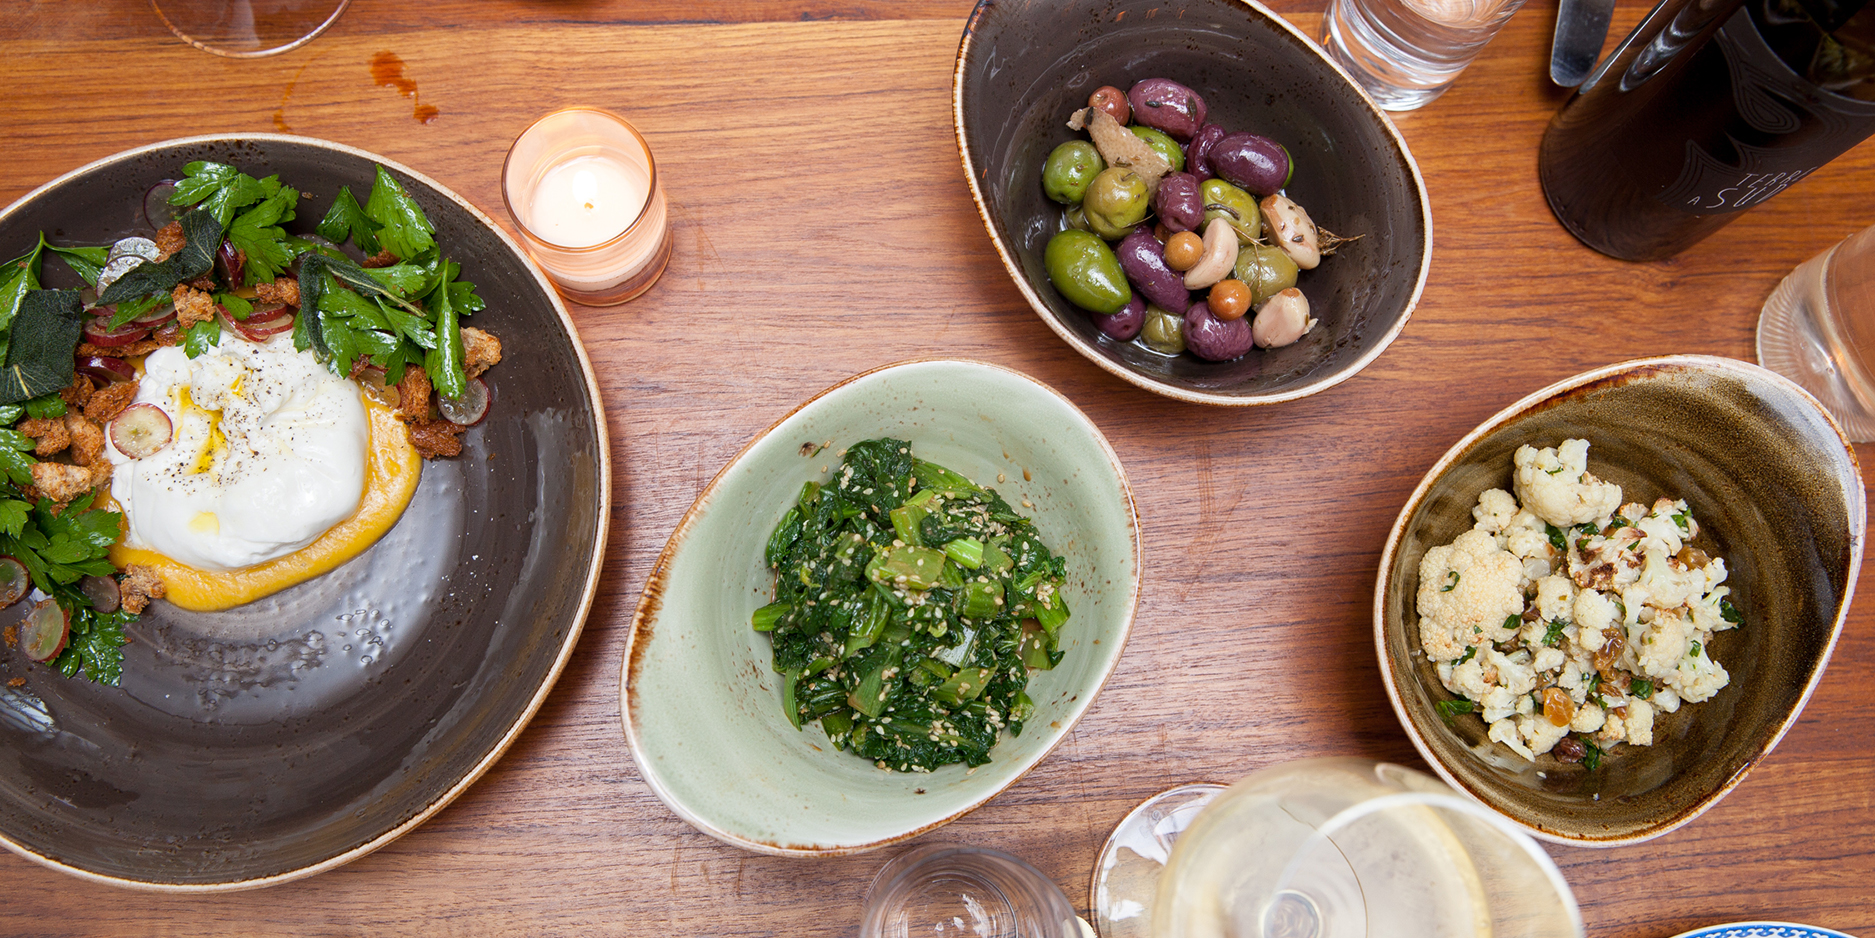 A wooden table with plates of assorted dishes including burrata with greens, a bowl of mixed olives, sautéed greens, and cauliflower. A glass of white wine and a lit candle are also present.